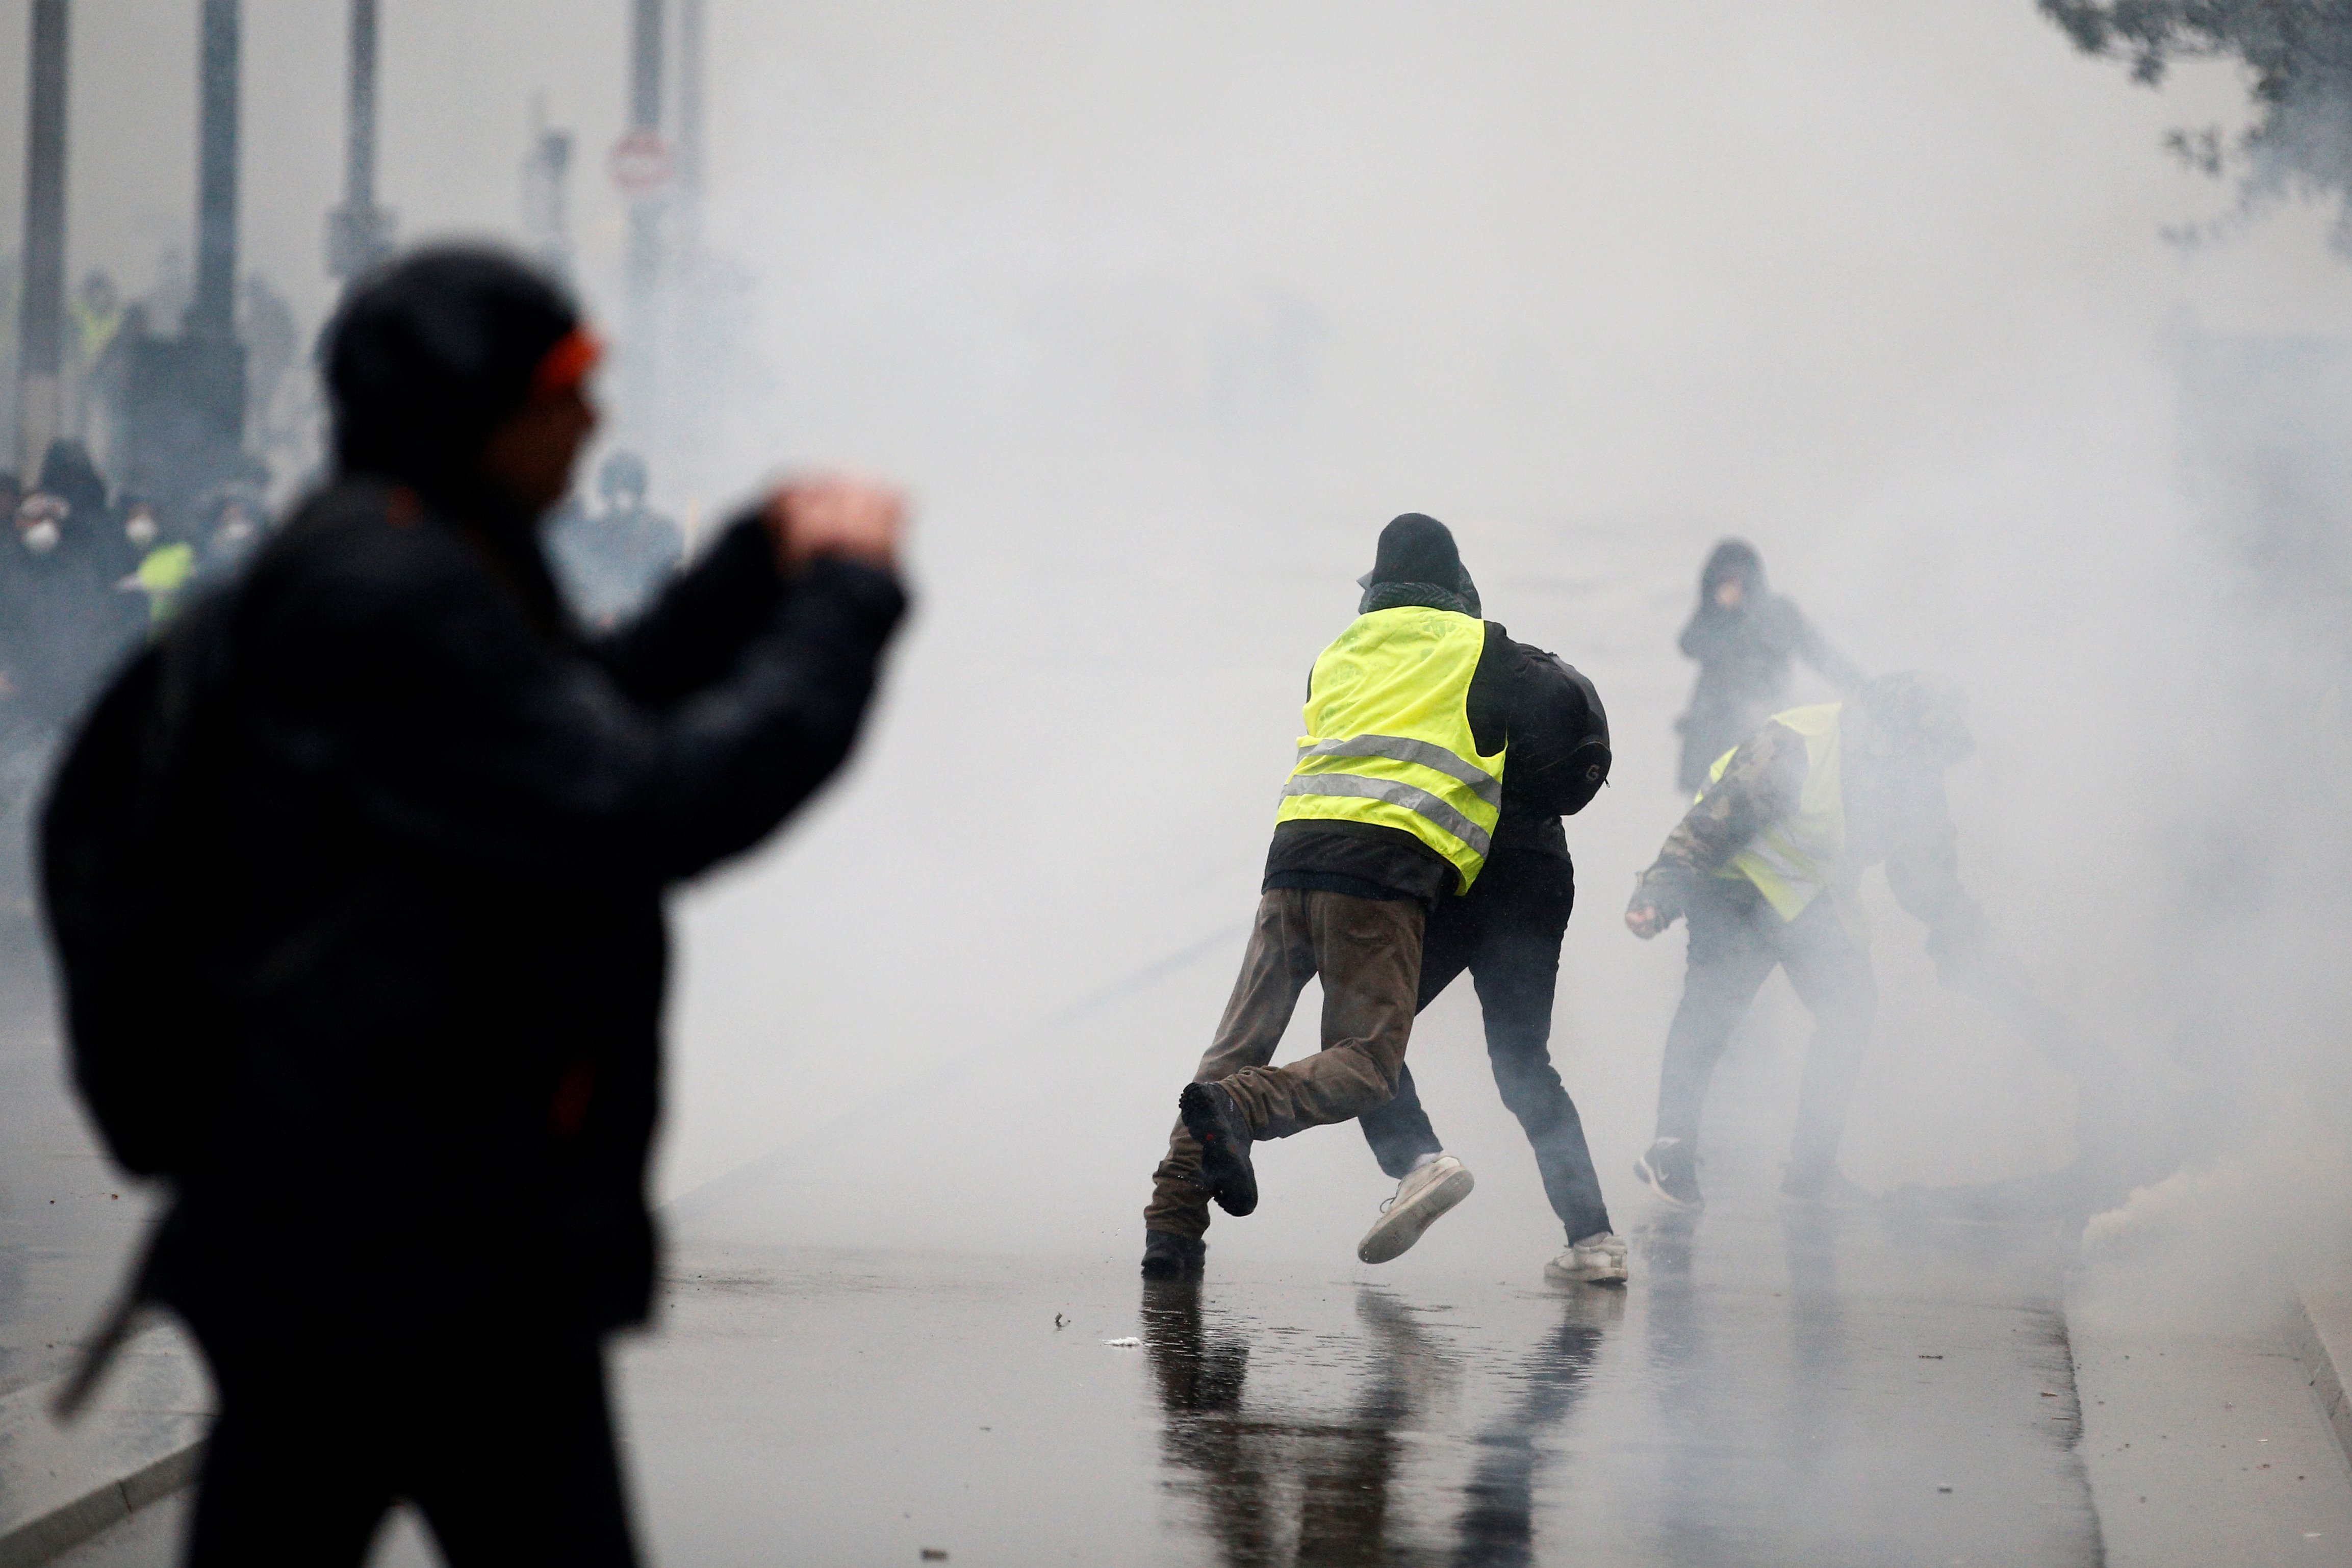 A man wearing a yellow vest tackles a protester as tear gas floats in the air during clashes with police at a demonstration by the "yellow vests" movement in Nantes, France, December 15, 2018. REUTERS/Stephane Mahe